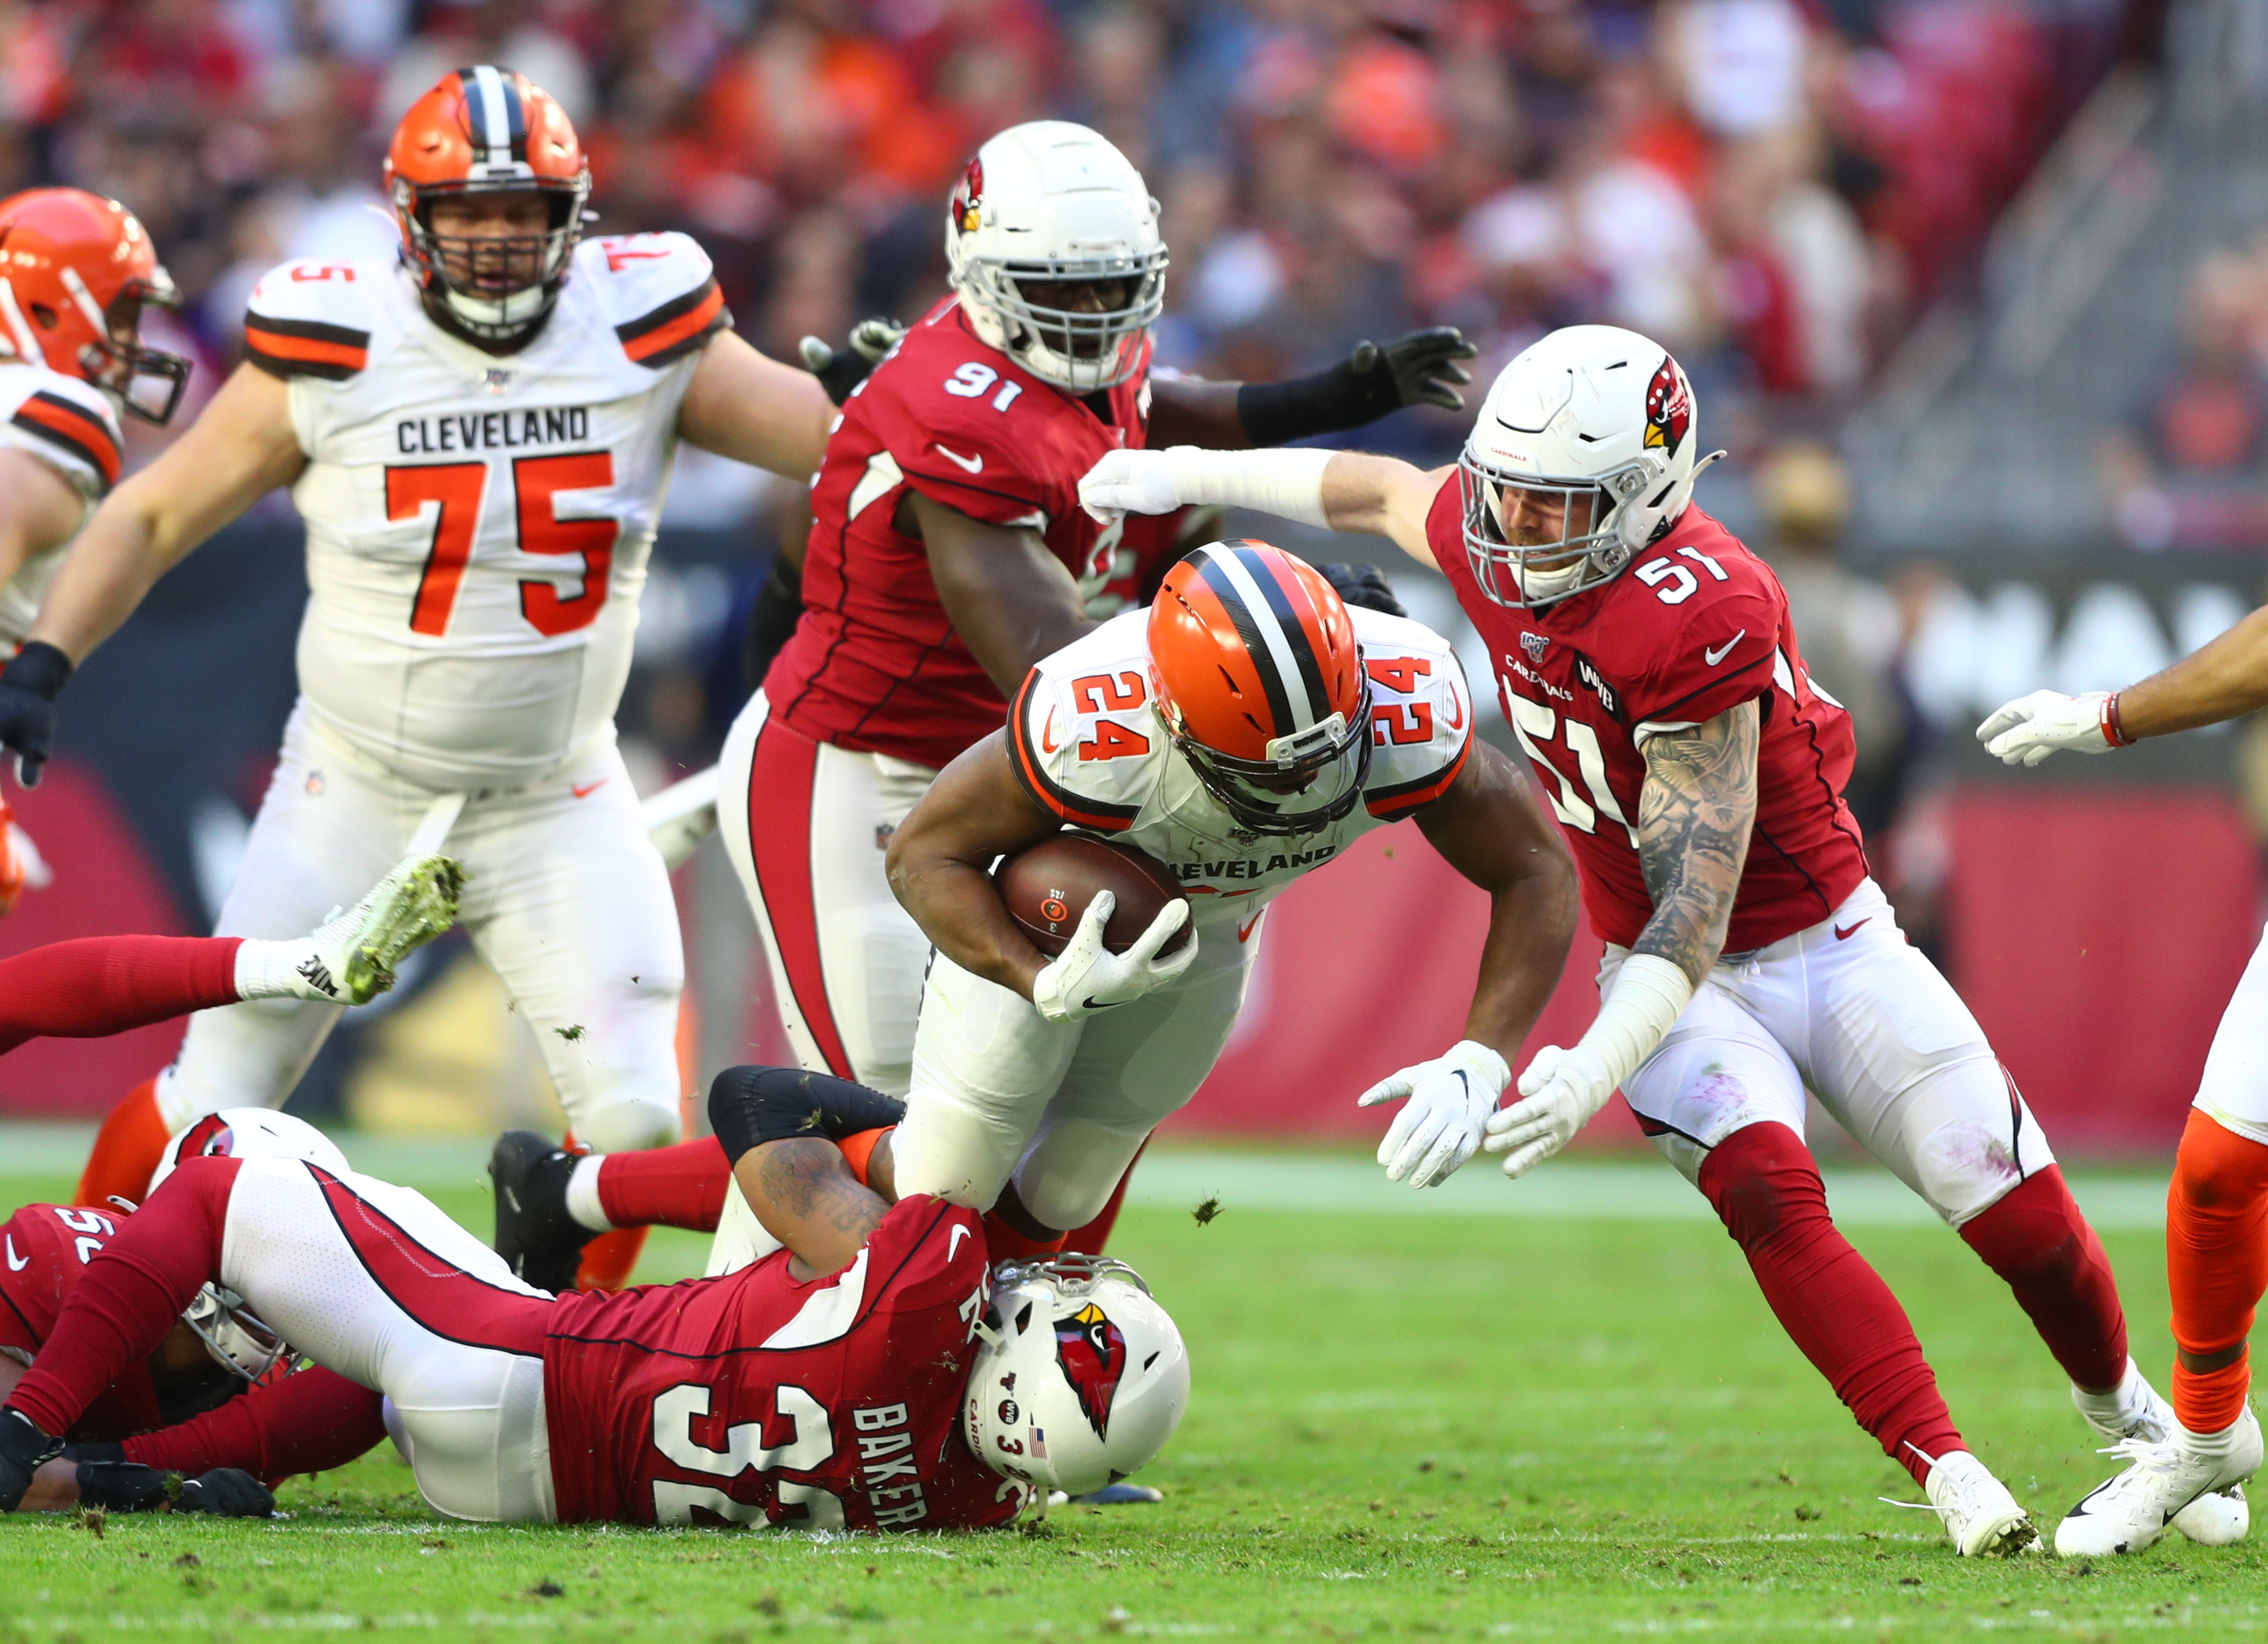 Cardinals vs. Browns final score: What we learned in 38-24 win